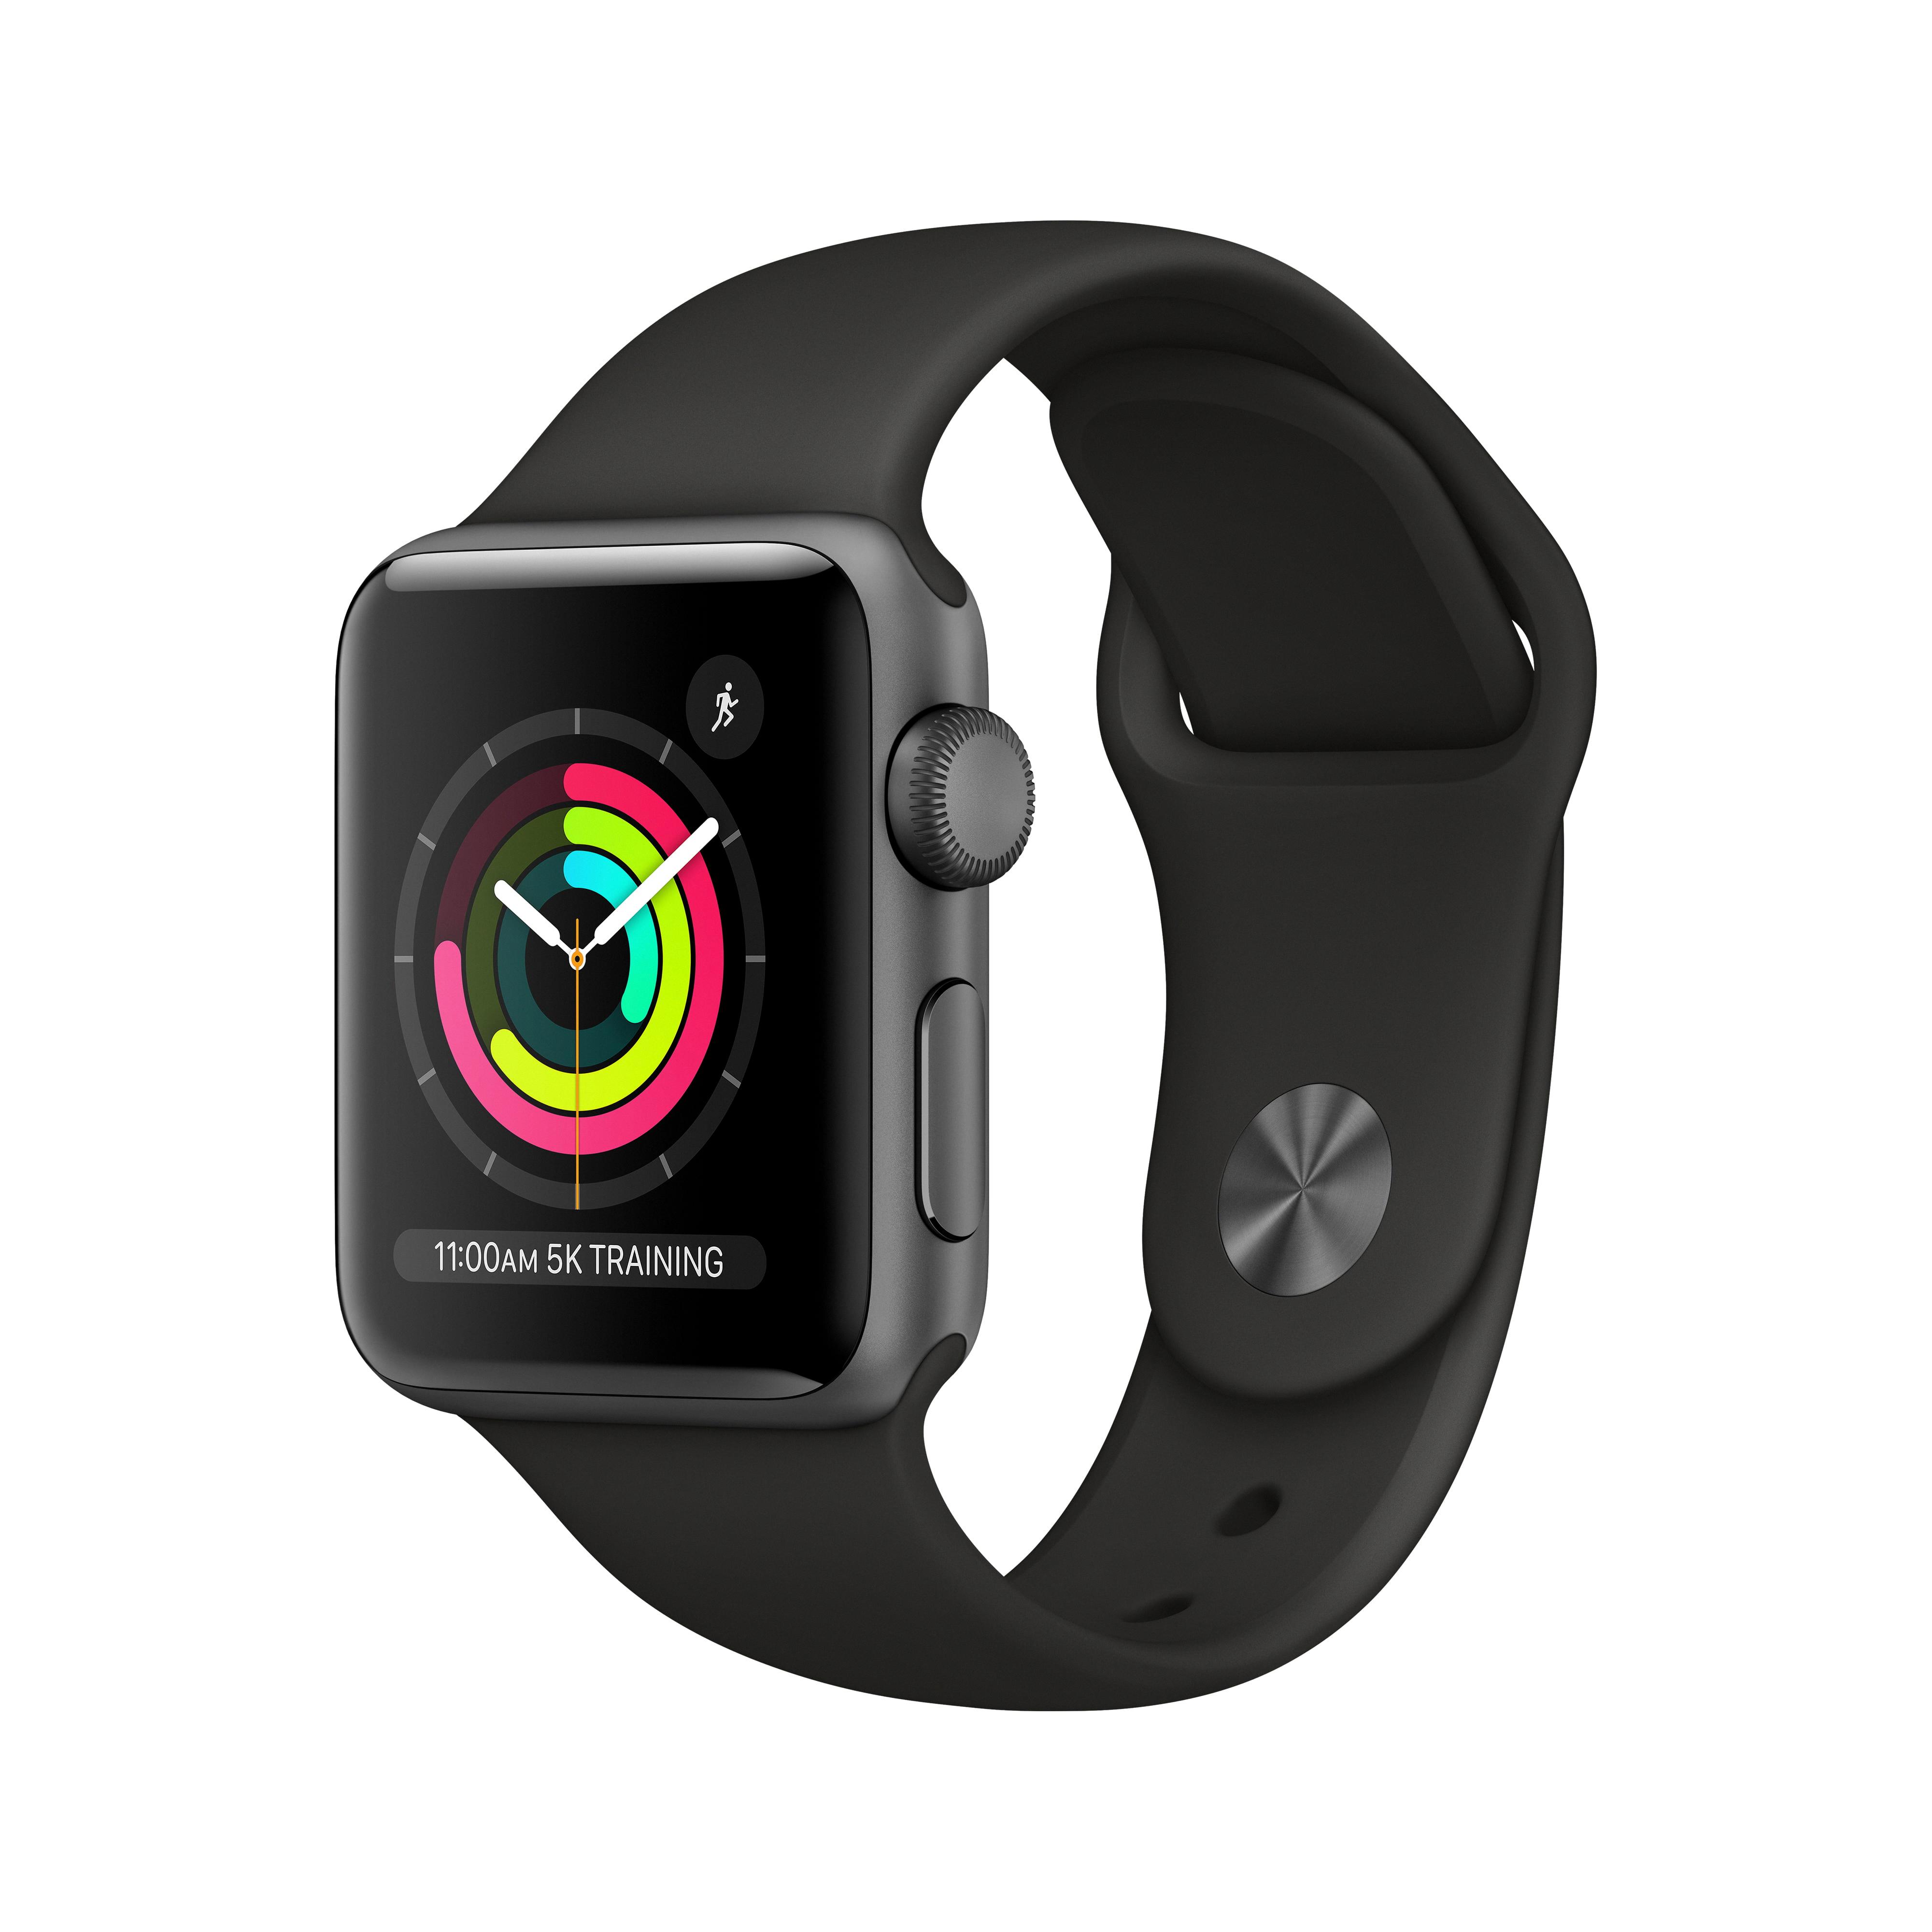 What Does Move Mean On Apple Watch? 9